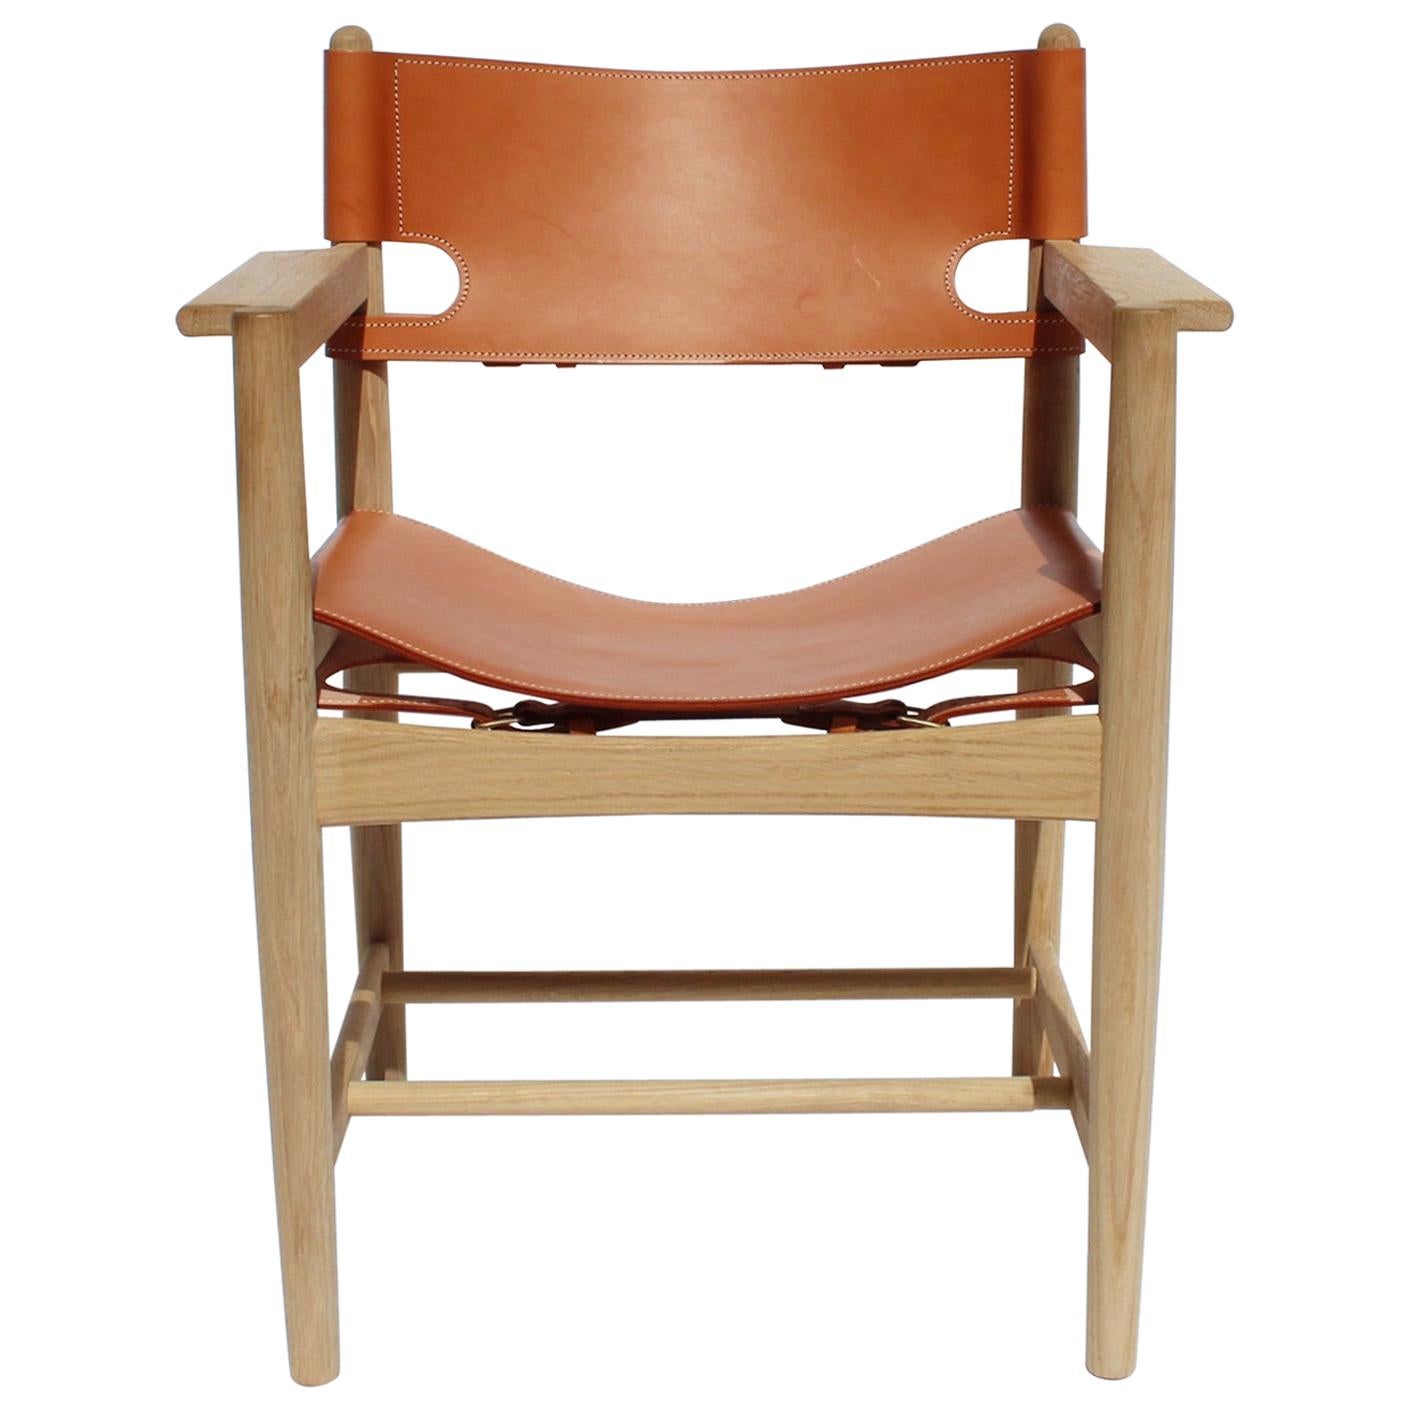 Spanish Dining Chair with Armrests, Model 3238, by Børge Mogensen